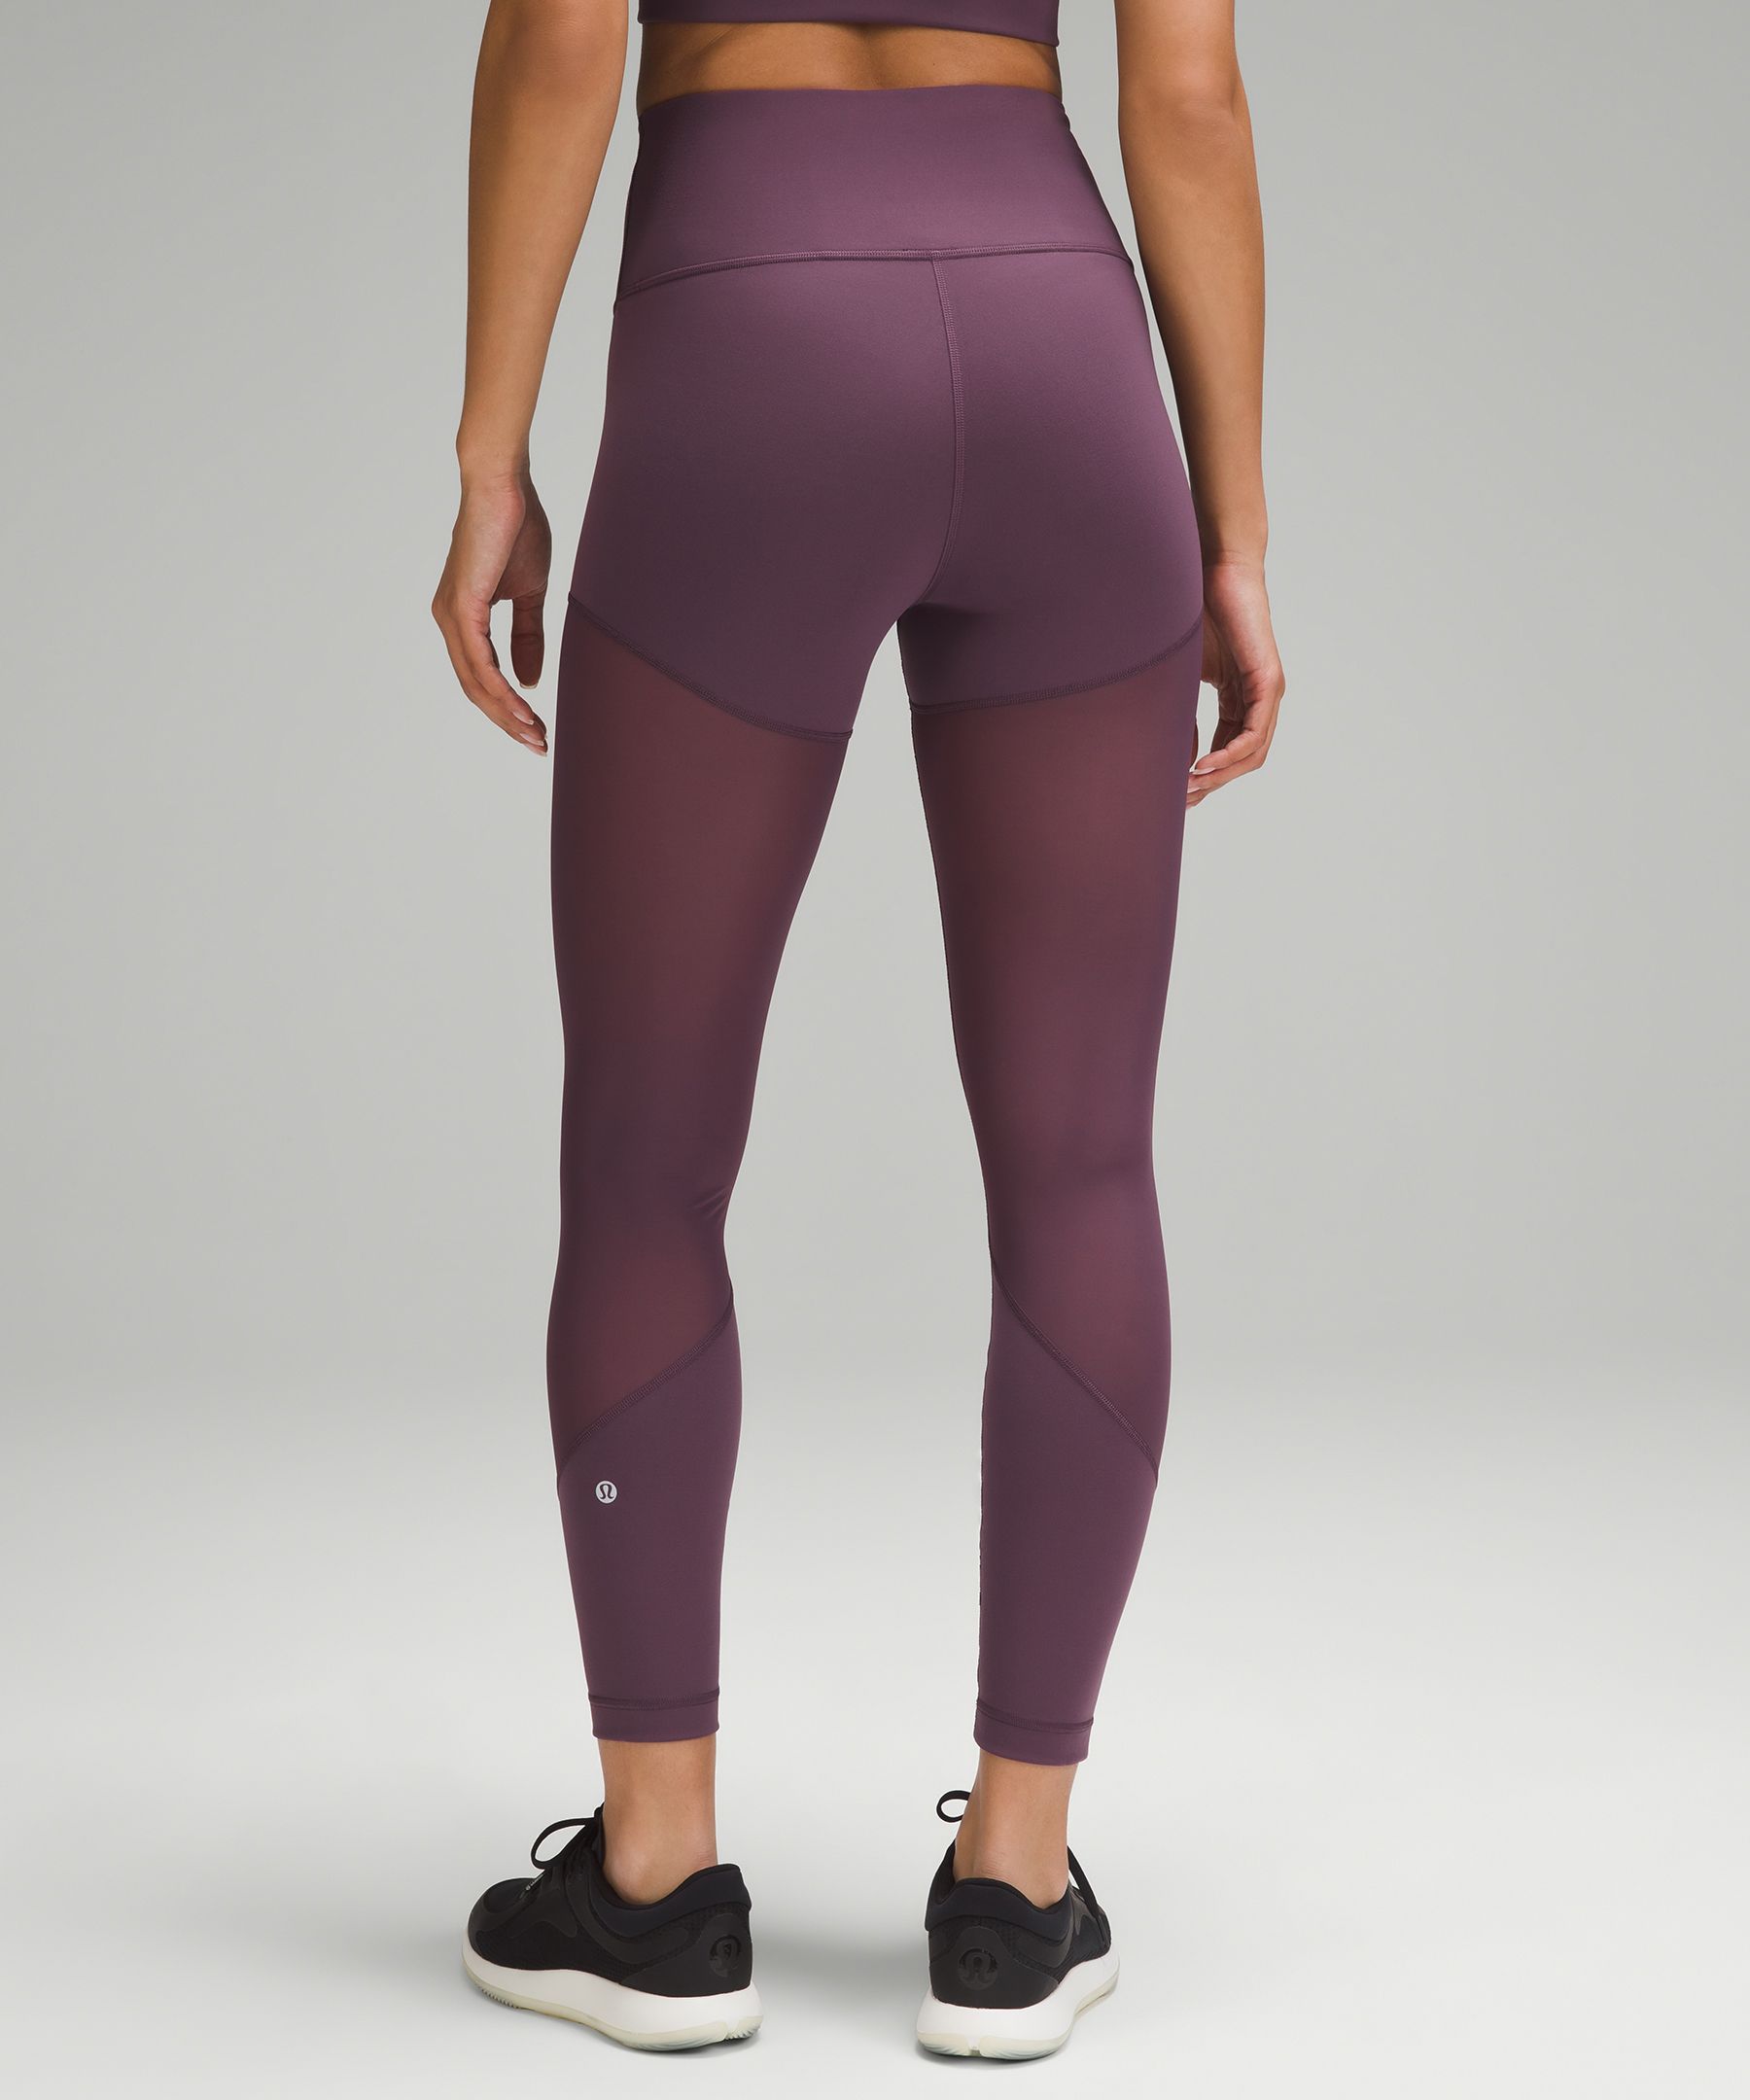 NWT Size 6 Lululemon Wunder Train High-Rise Tight with Pockets 25 Wild  Indigo for Sale in Tempe, AZ - OfferUp